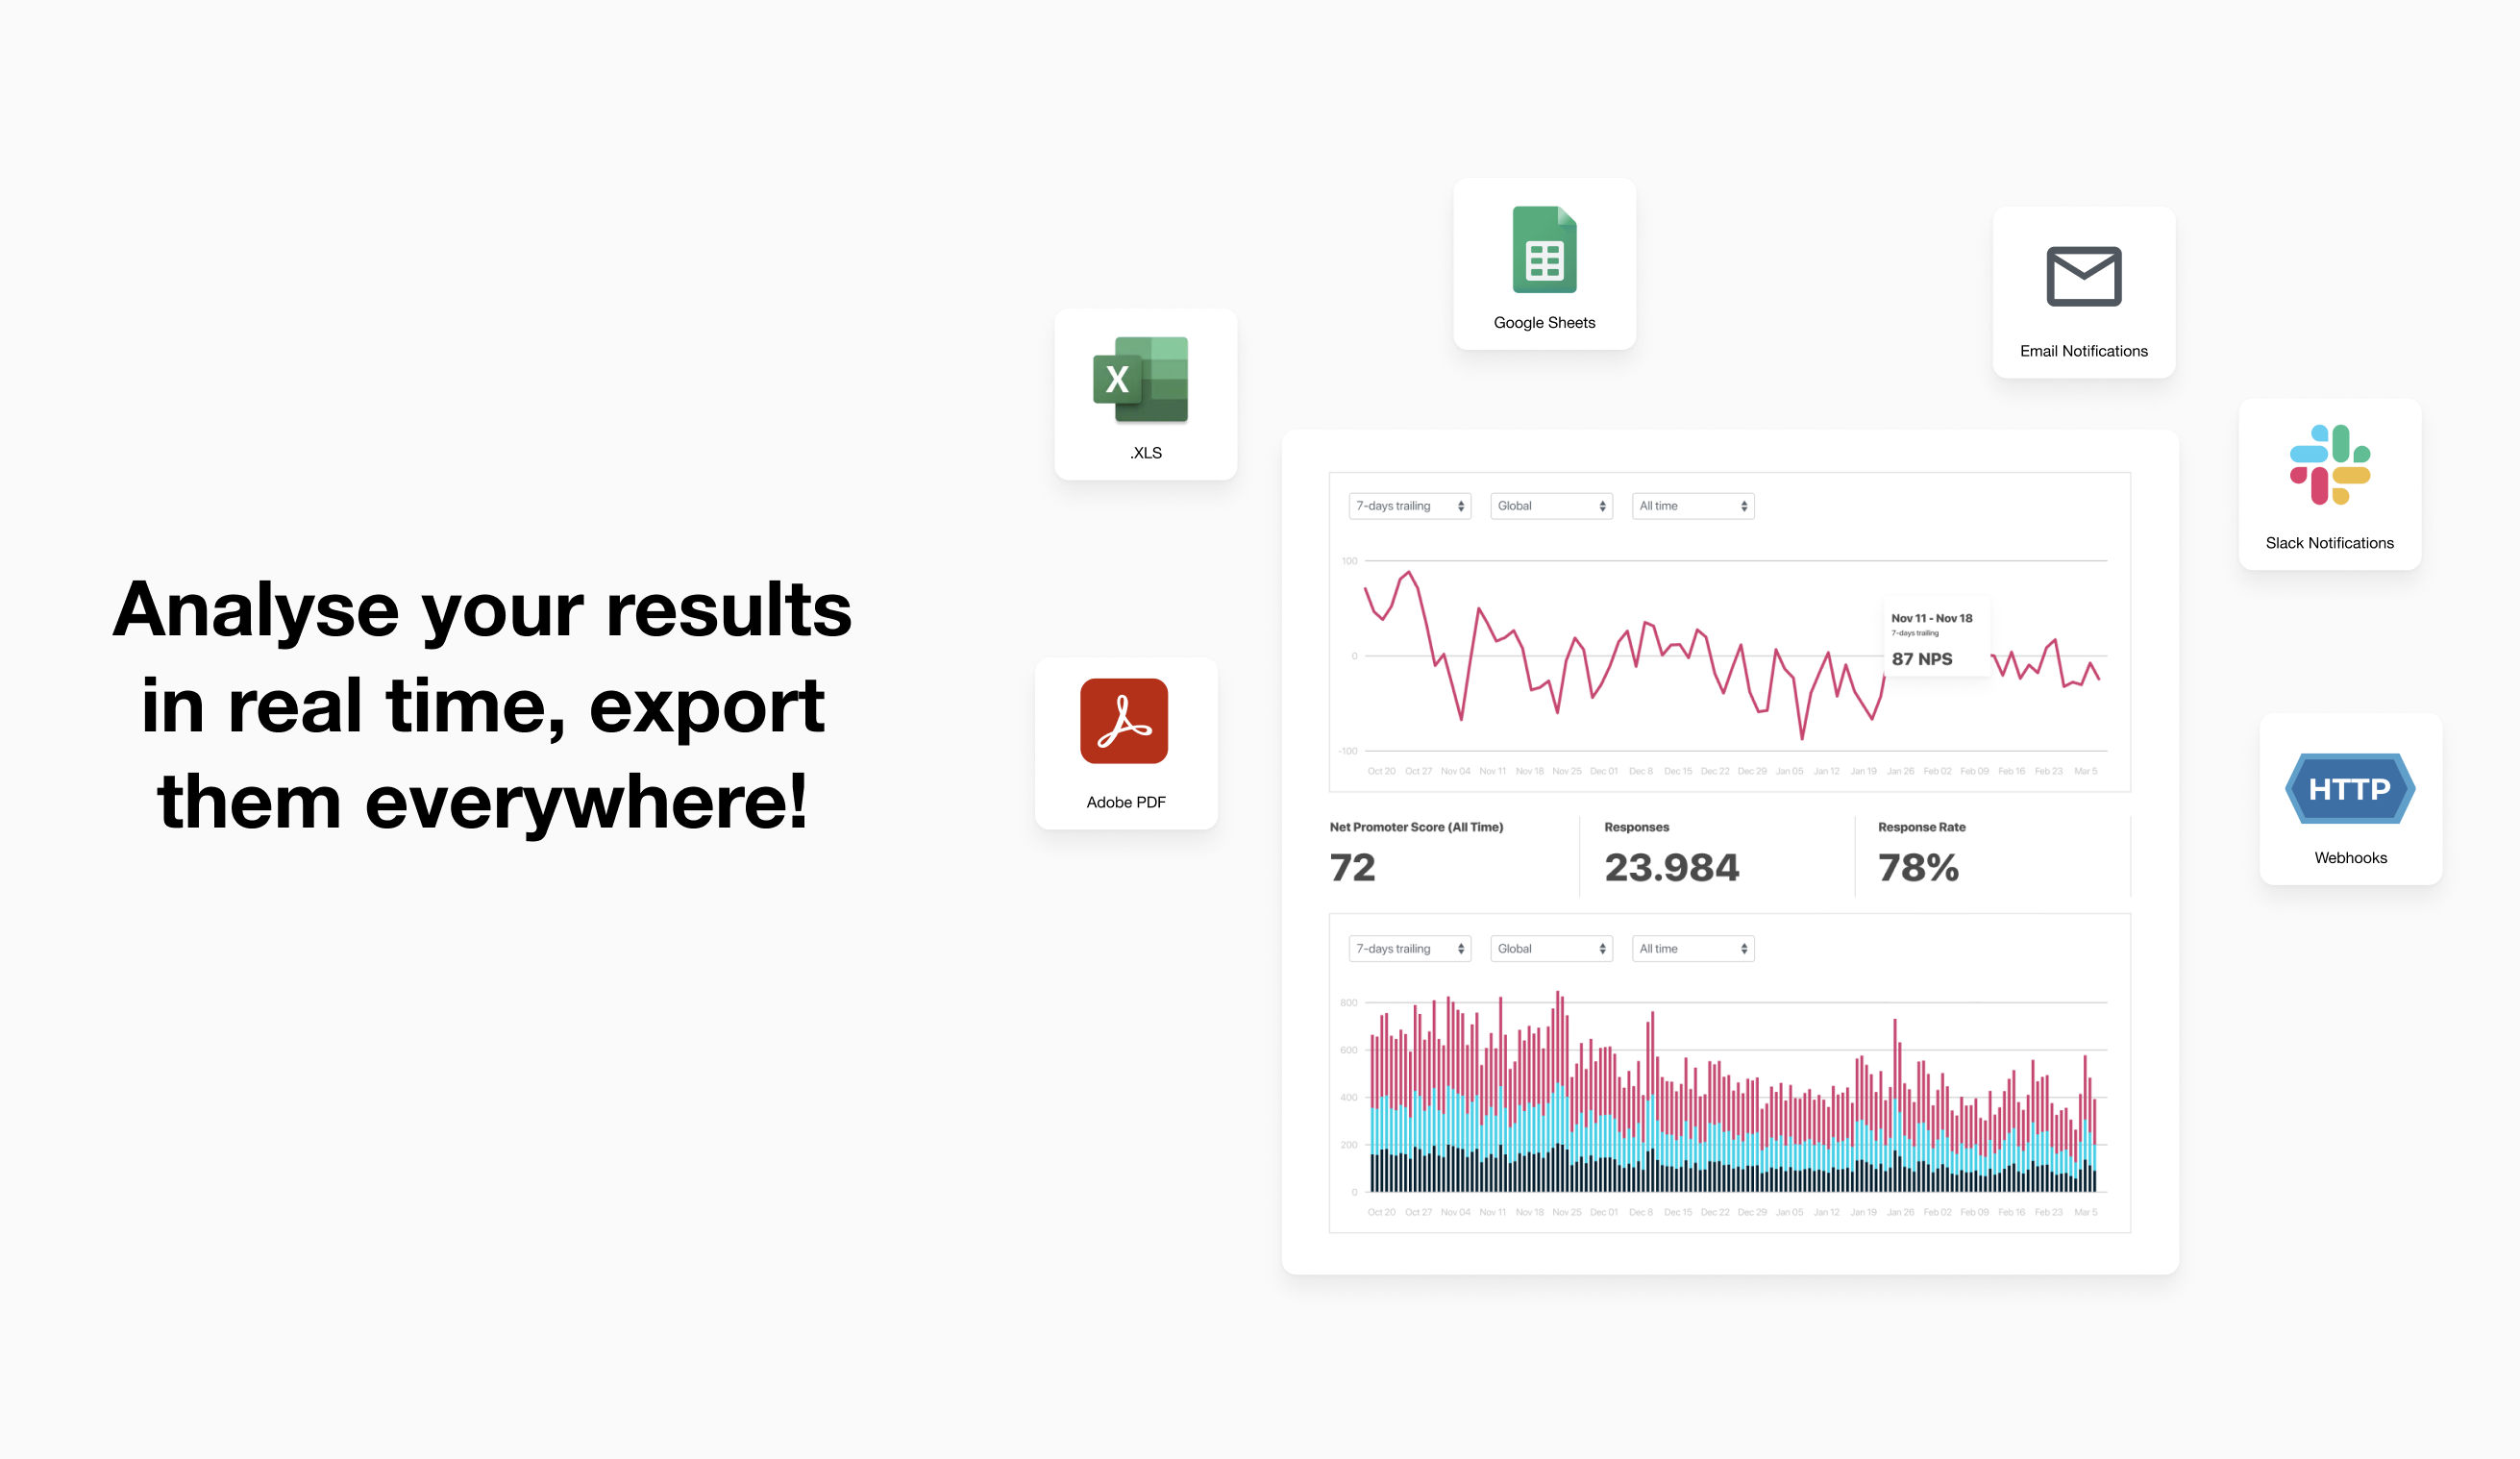 Analyse and export your results